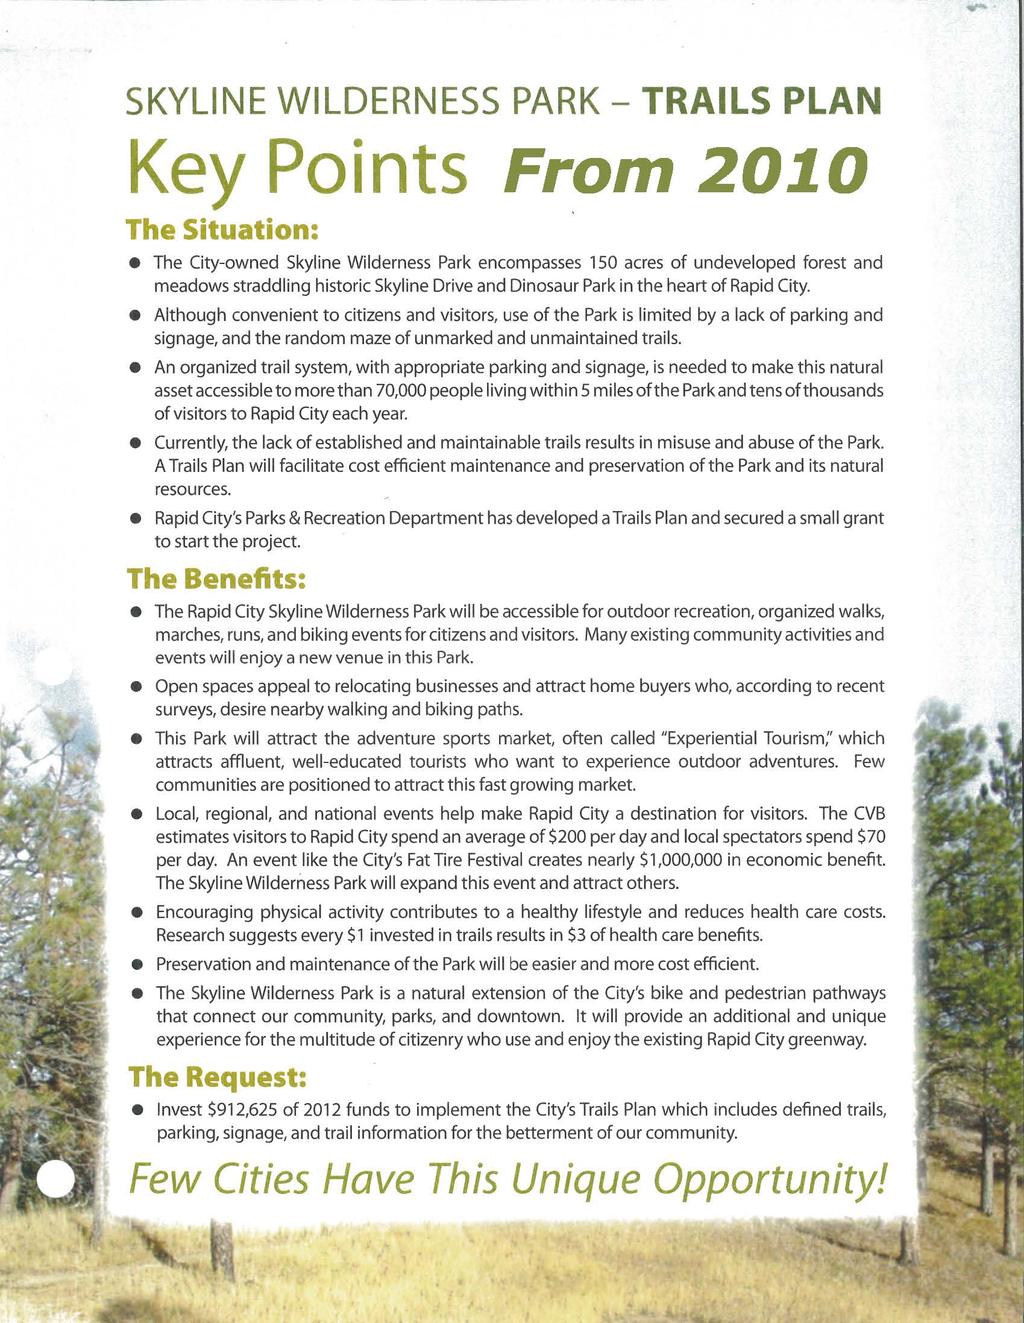 KYLINE WILDENE PAK- AIL PLAN Key Points From 2010 he ituation: he City-owned kyline Wilderness Park encompasses 150 acres of undeveloped forest and meadows straddling historic kyline Drive and